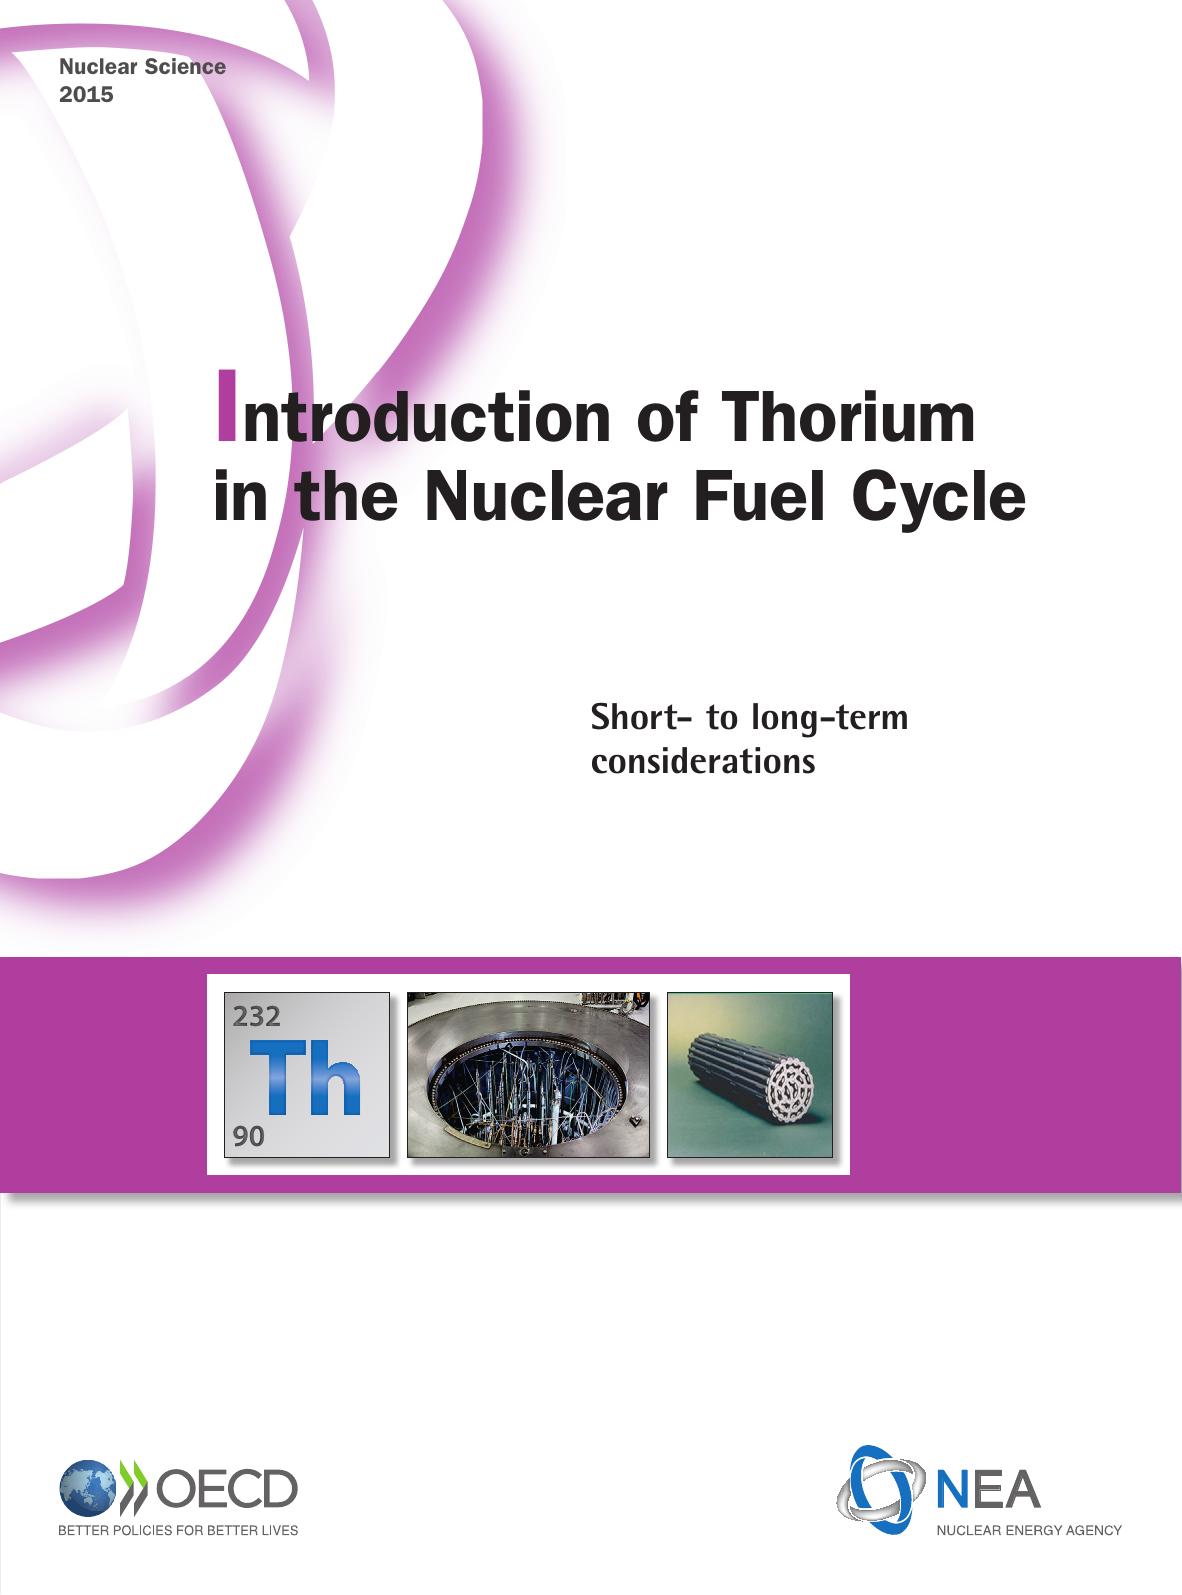 Introduction of Thorium in the Nuclear Fuel Cycle